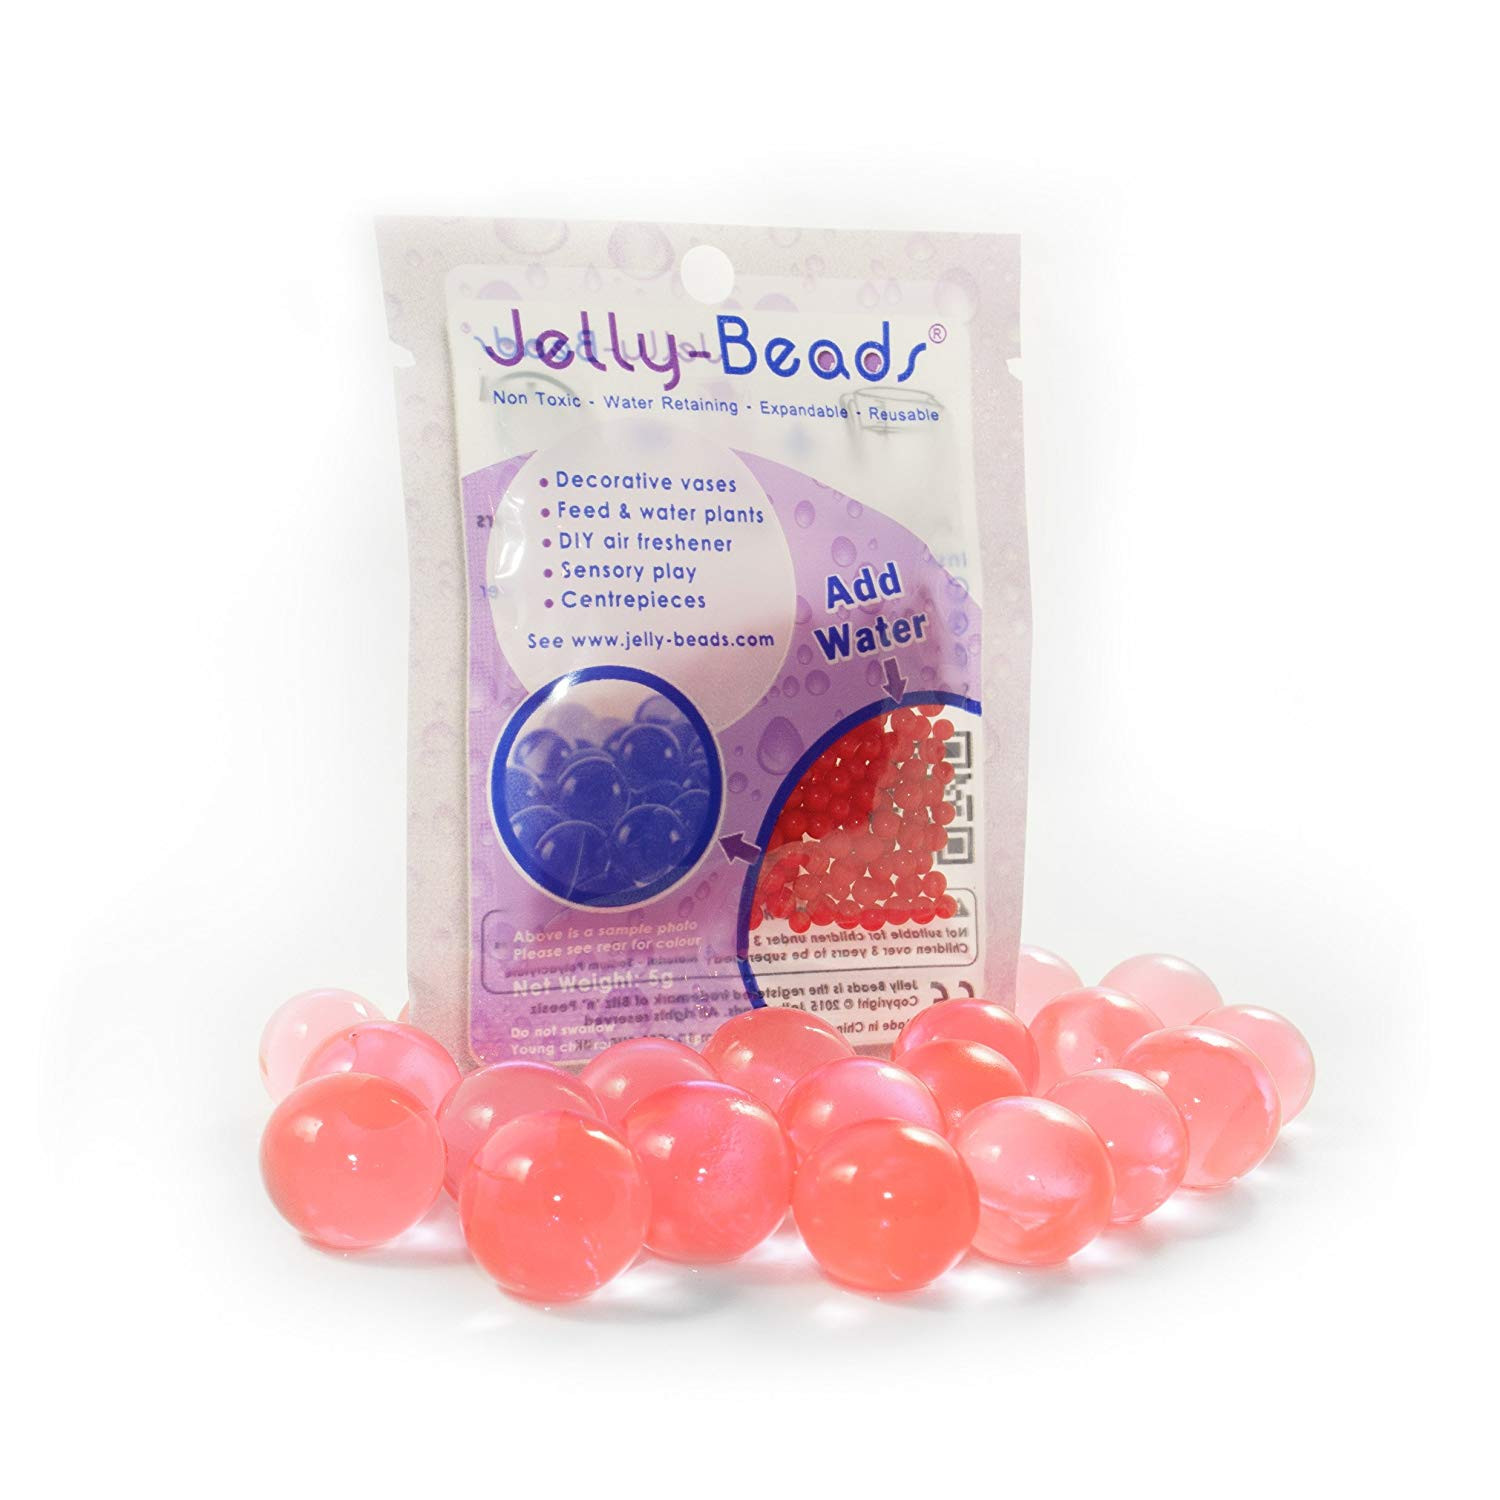 10 Stylish Water Gel Beads for Vases 2023 free download water gel beads for vases of jelly beads a red 10 x 5g decorative water retaining expanding regarding jelly beads a red 10 x 5g decorative water retaining expanding beads ideal for vases wed